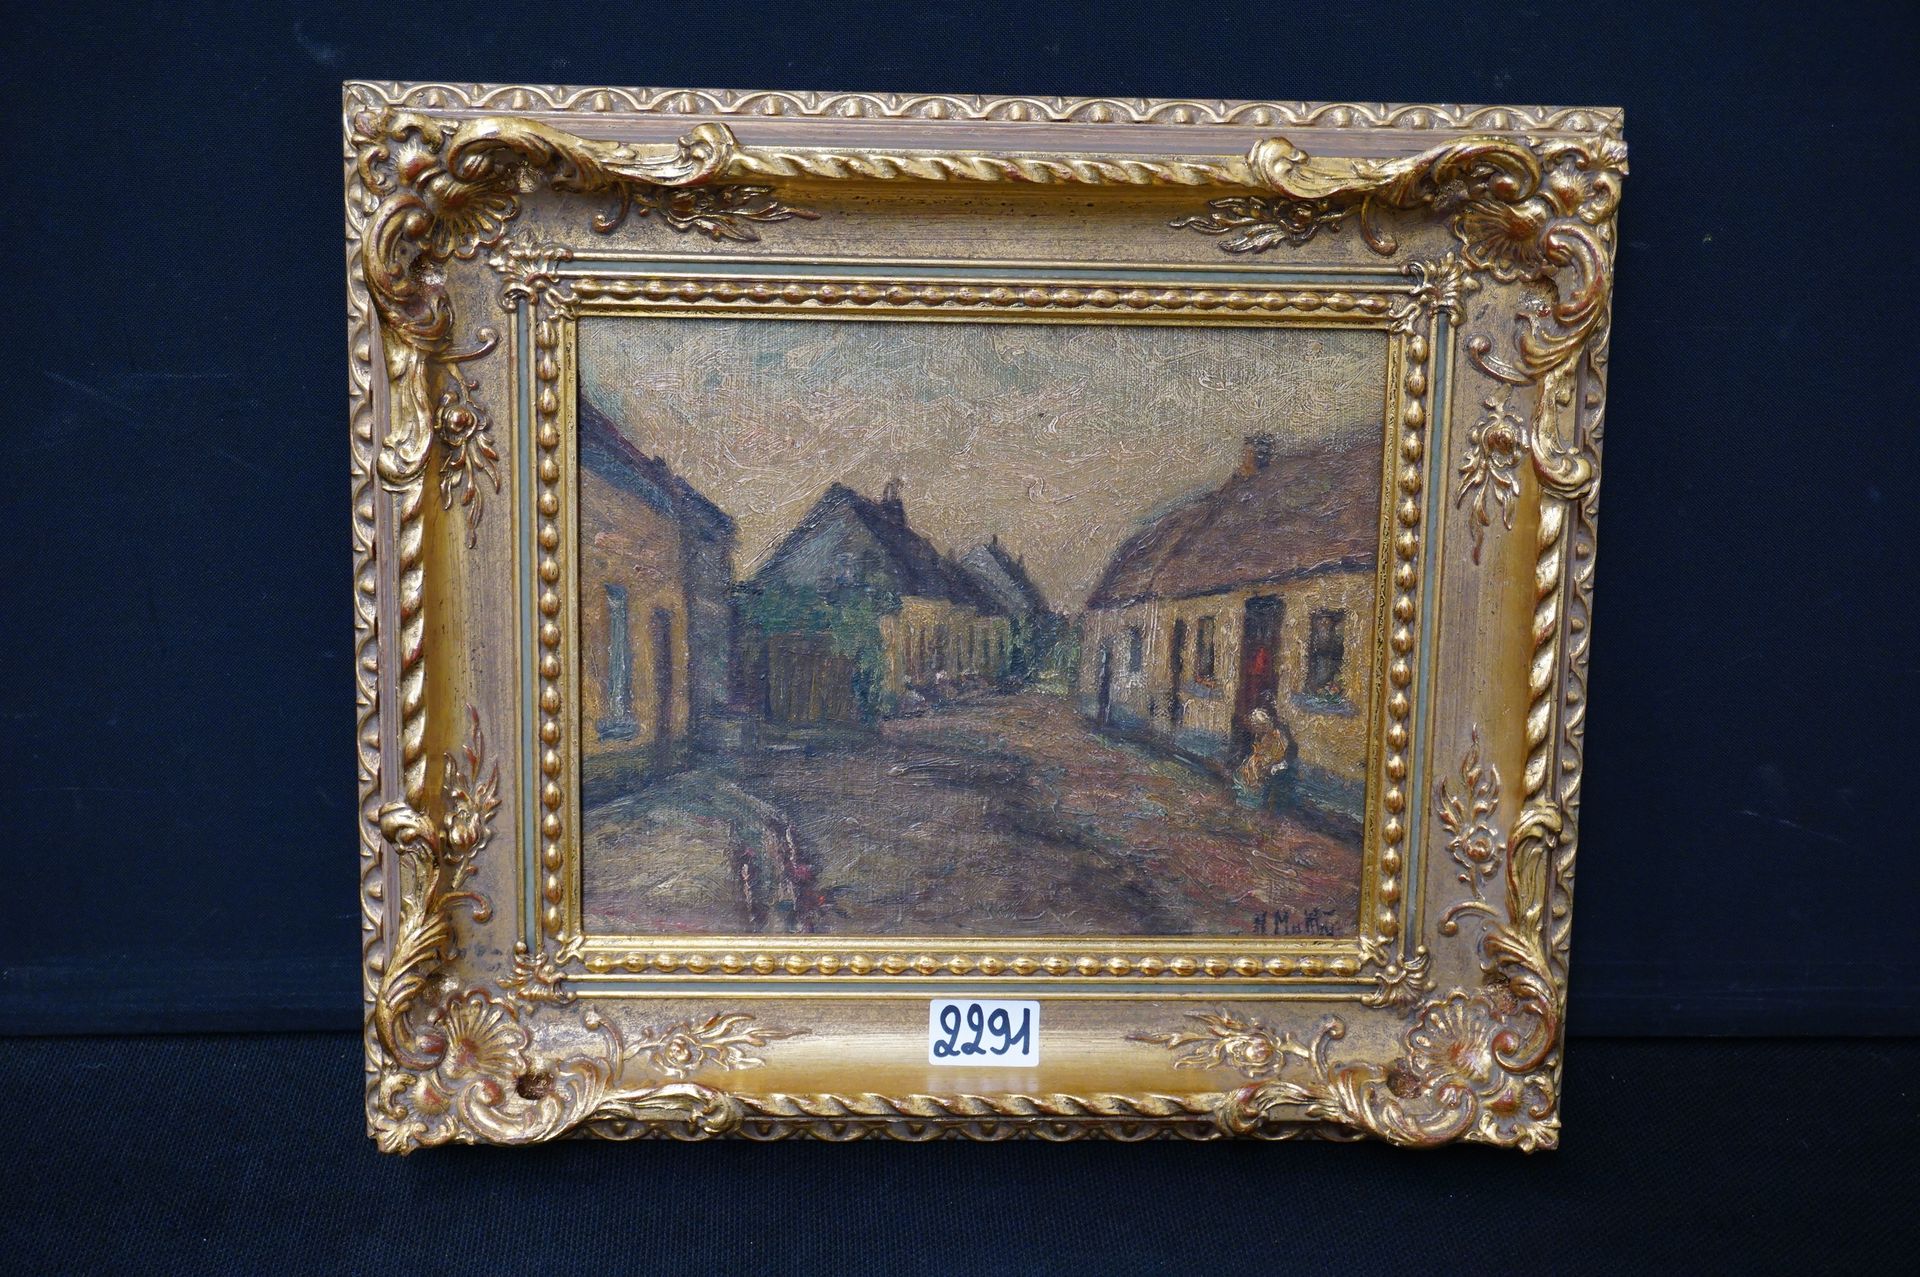 H. MATTHYS "Street View" - Oil on panel - Signed - 24 x 30 cm